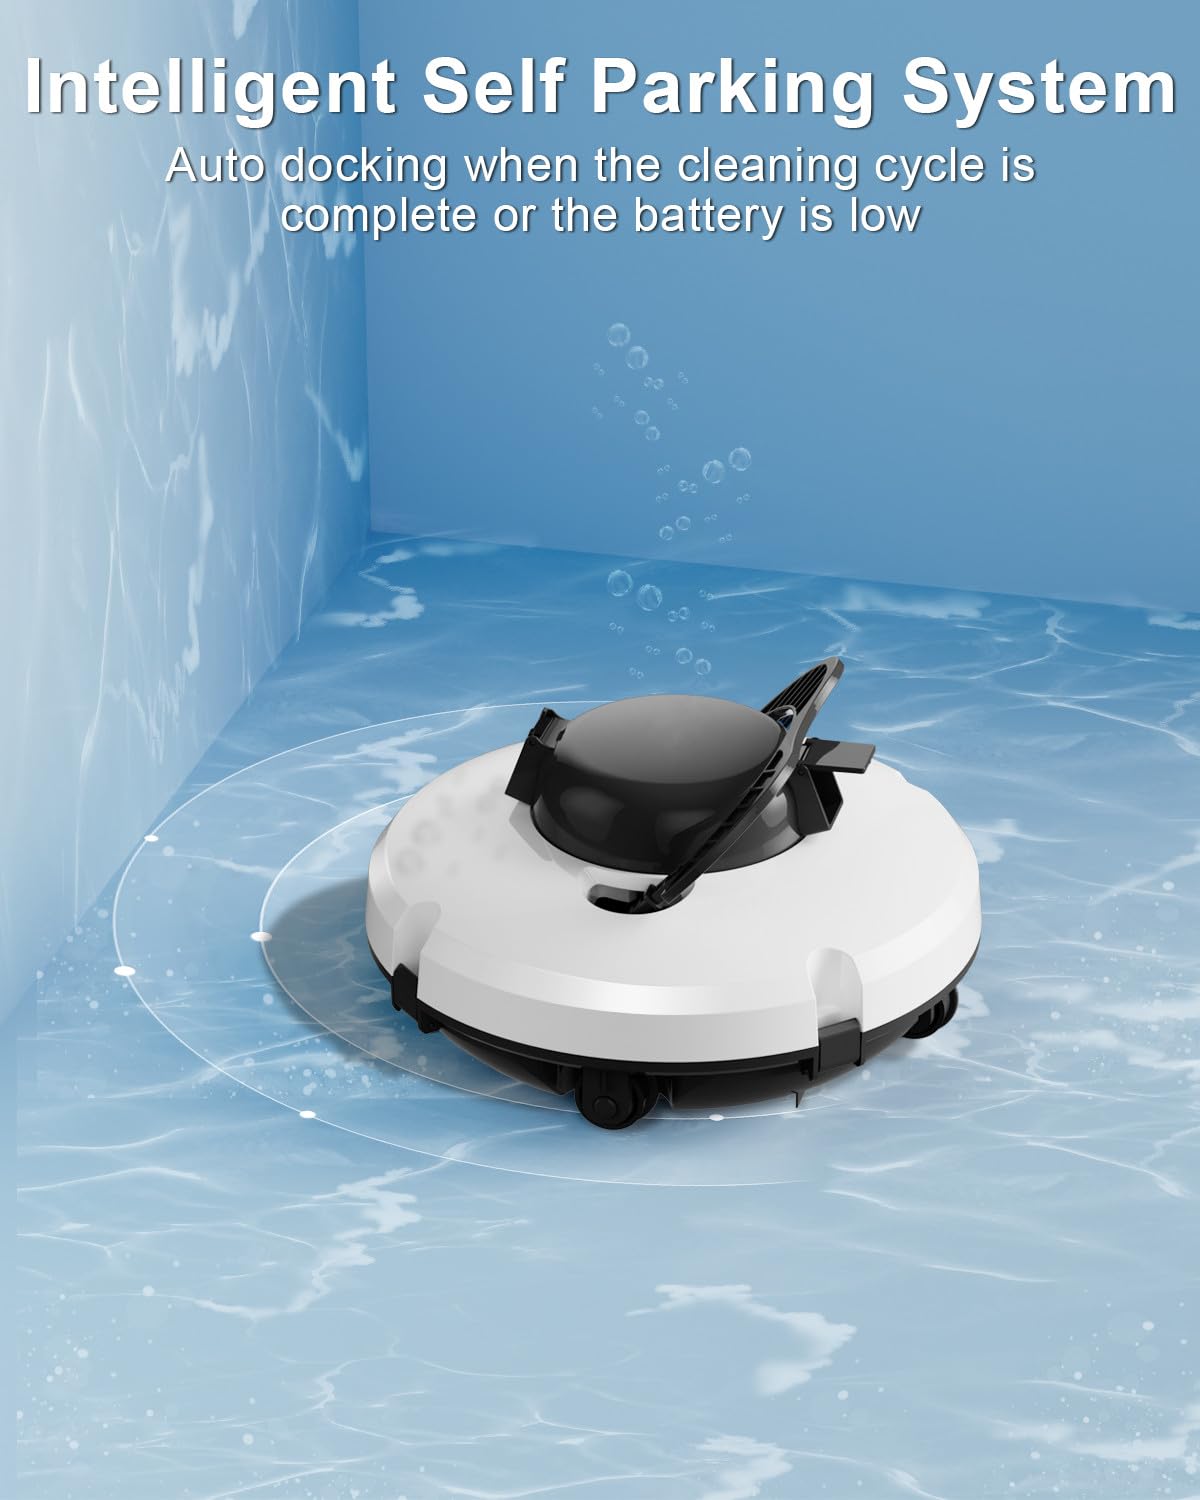 Cordless Pool Vacuum Cleaner, Robotic Pool Cleaner Dual Motors Strong Suction, 120 Mins Runtime, Auto-Dock, Rechargeable Portable Pool Cleaner Robot for Above/In-Ground Flat Pools up to 1000 Sq.Ft